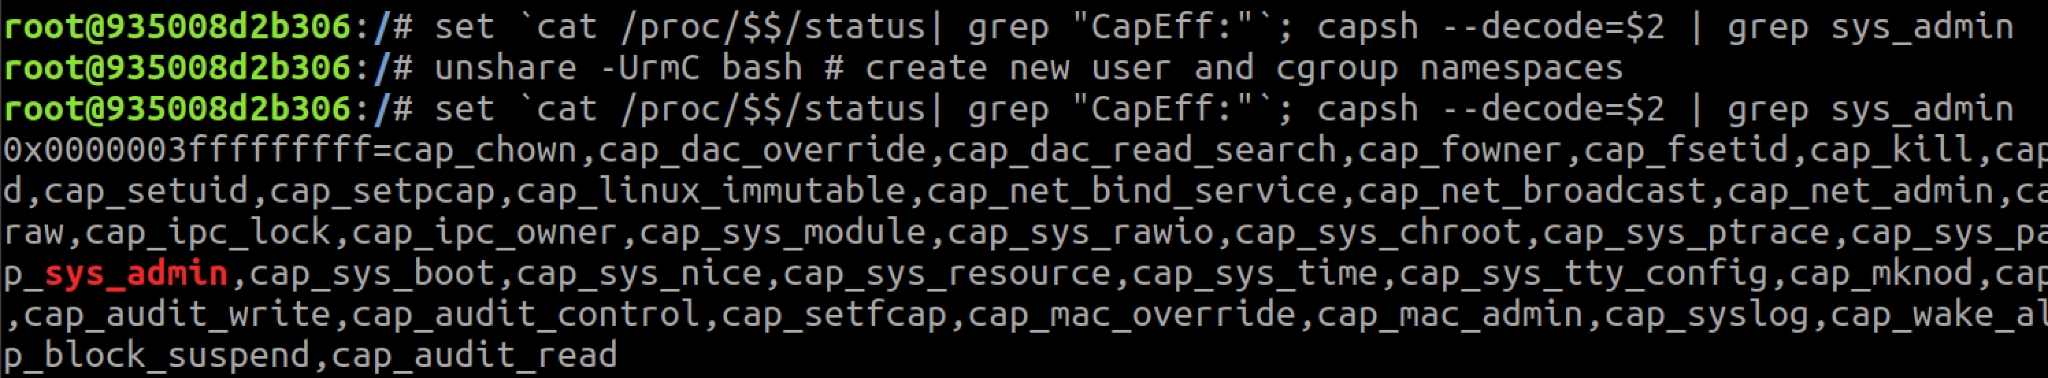 A container creating a new user namespace where it'll have the CAP_SYS_ADMIN capability.